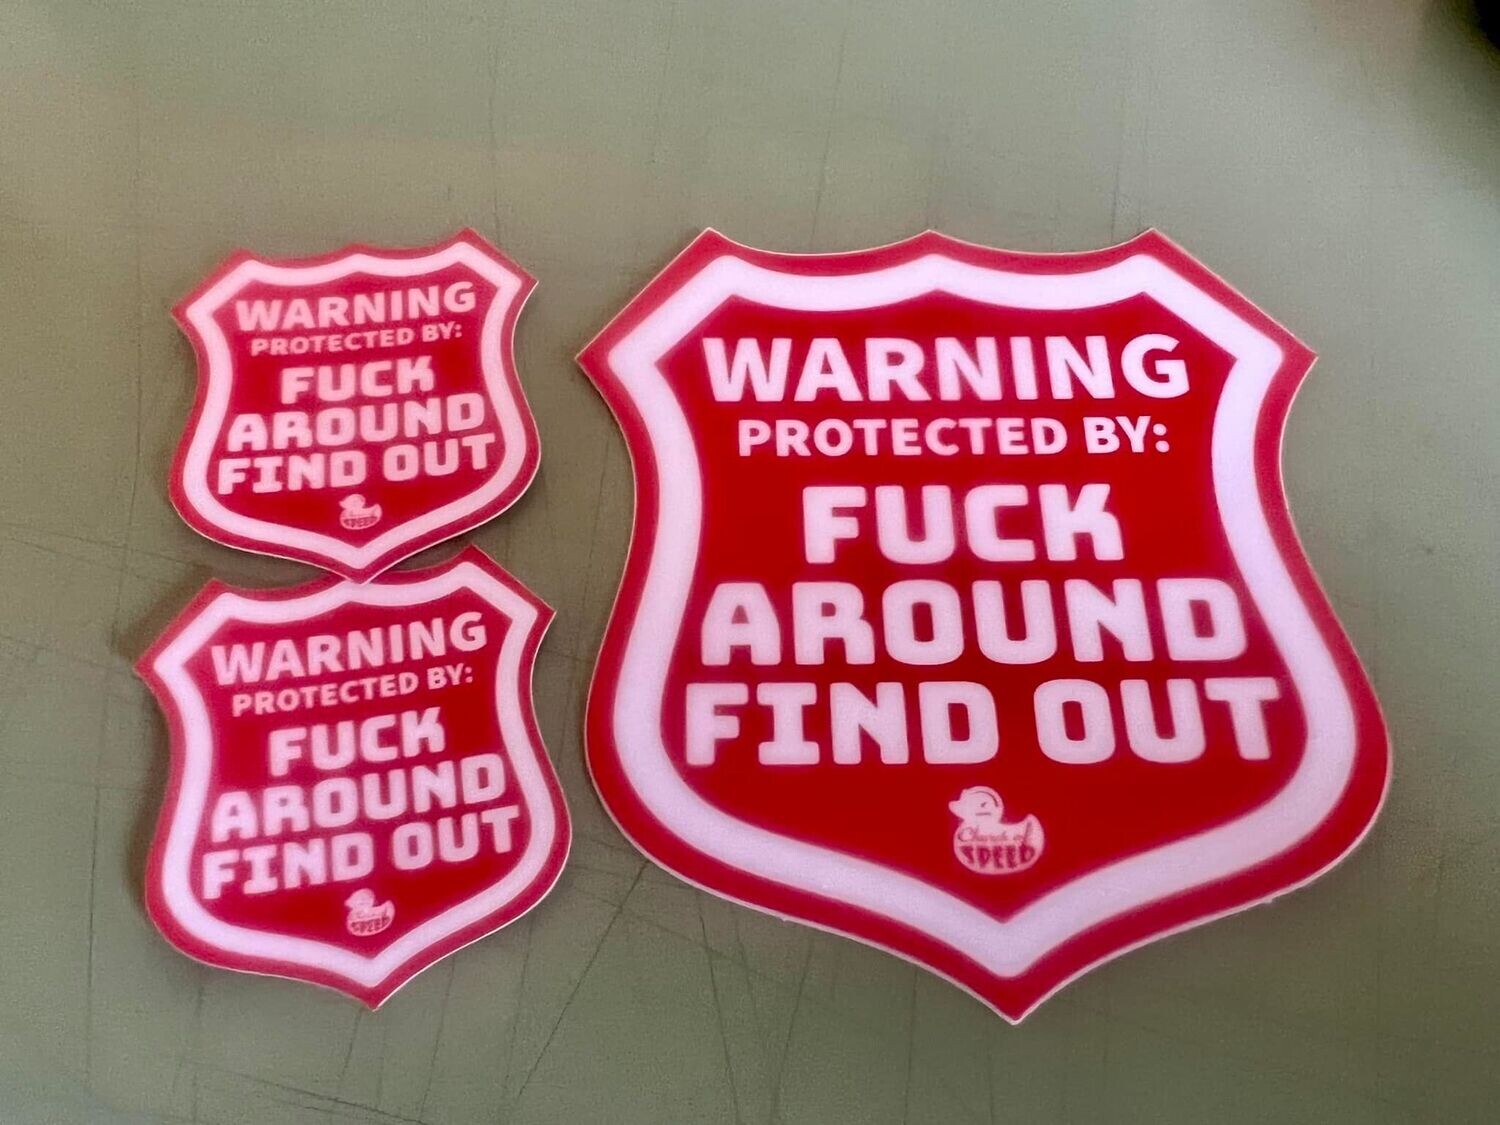 The Home Security System Stickers